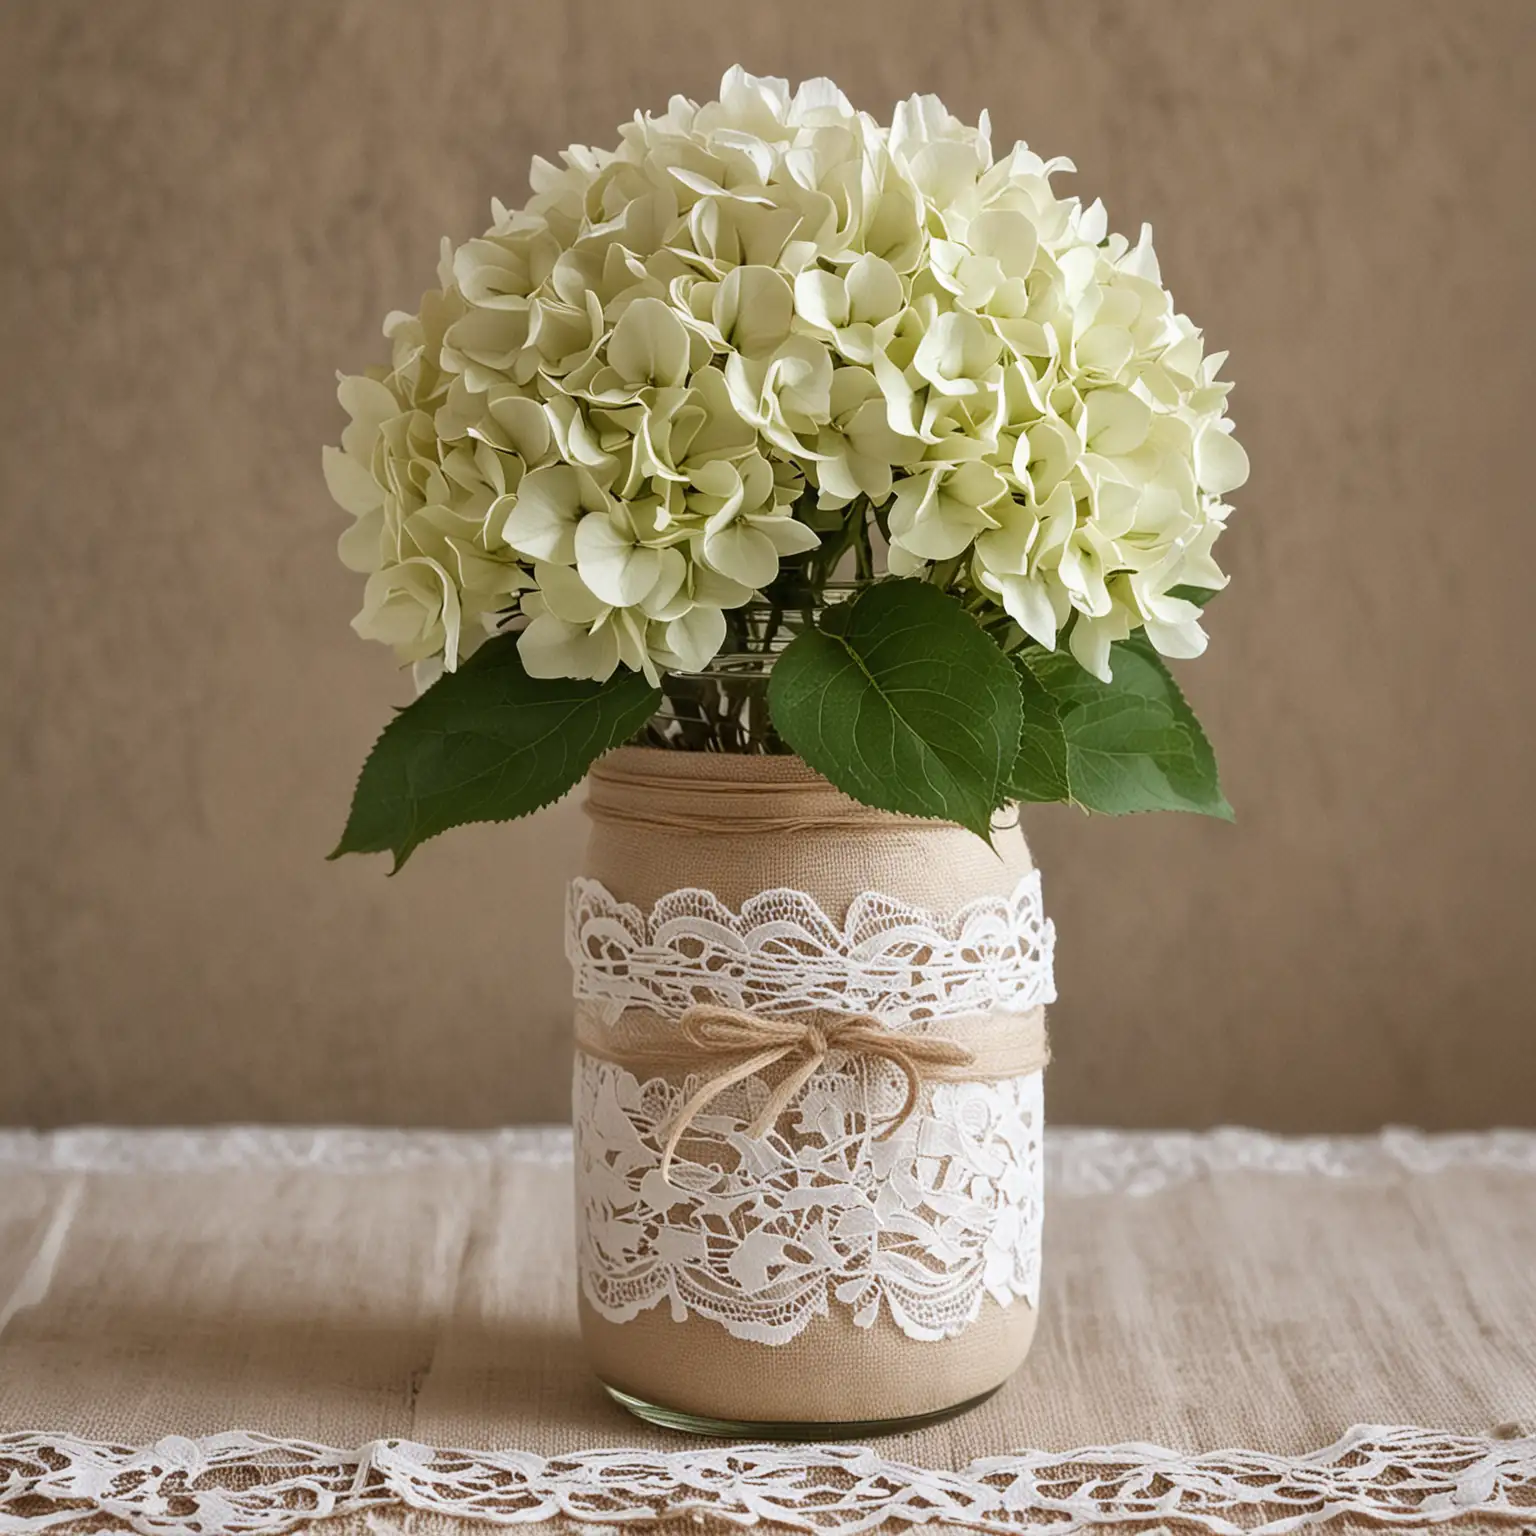 a rustic wedding centerpiece with a jar covered in solid ivory linen fabric and accented with white lace and holding a hydrangea stem